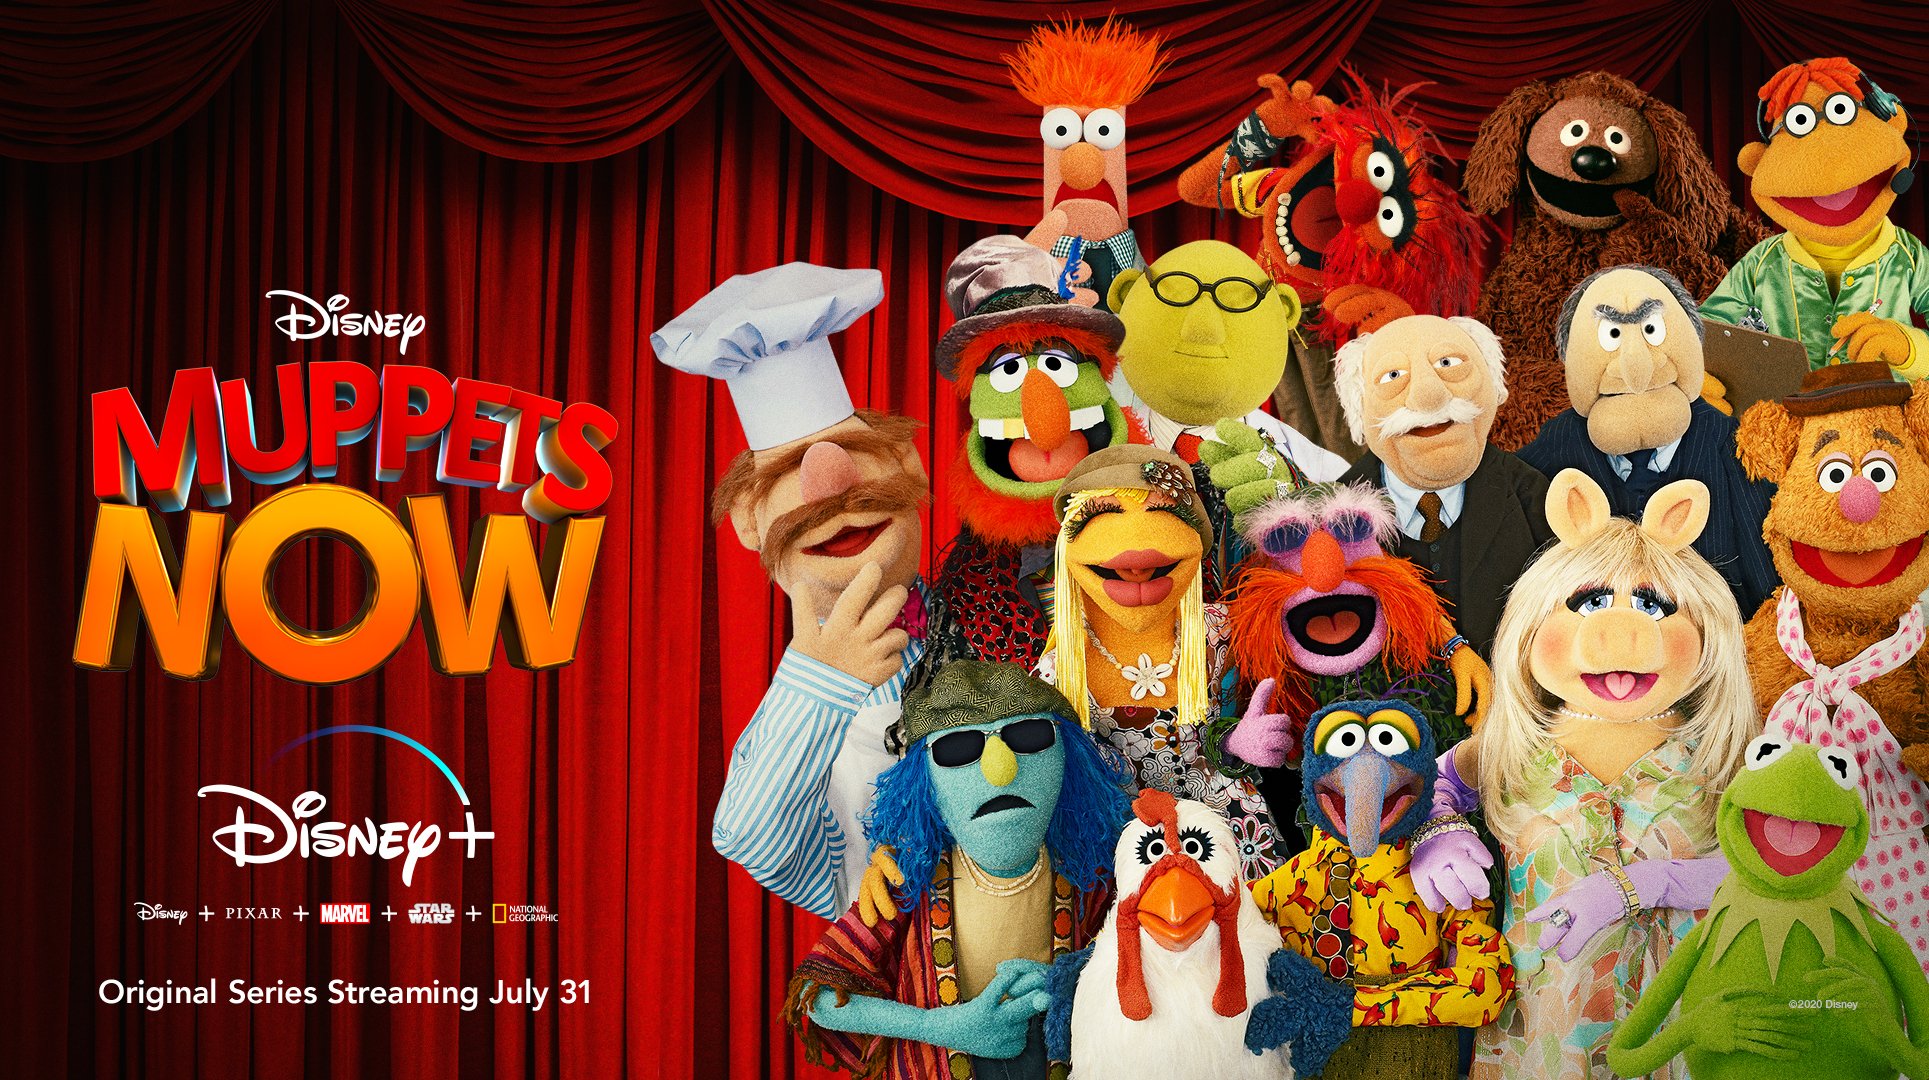 NEW Muppets Show Original Series Coming to Disney+ with 'Muppets Now